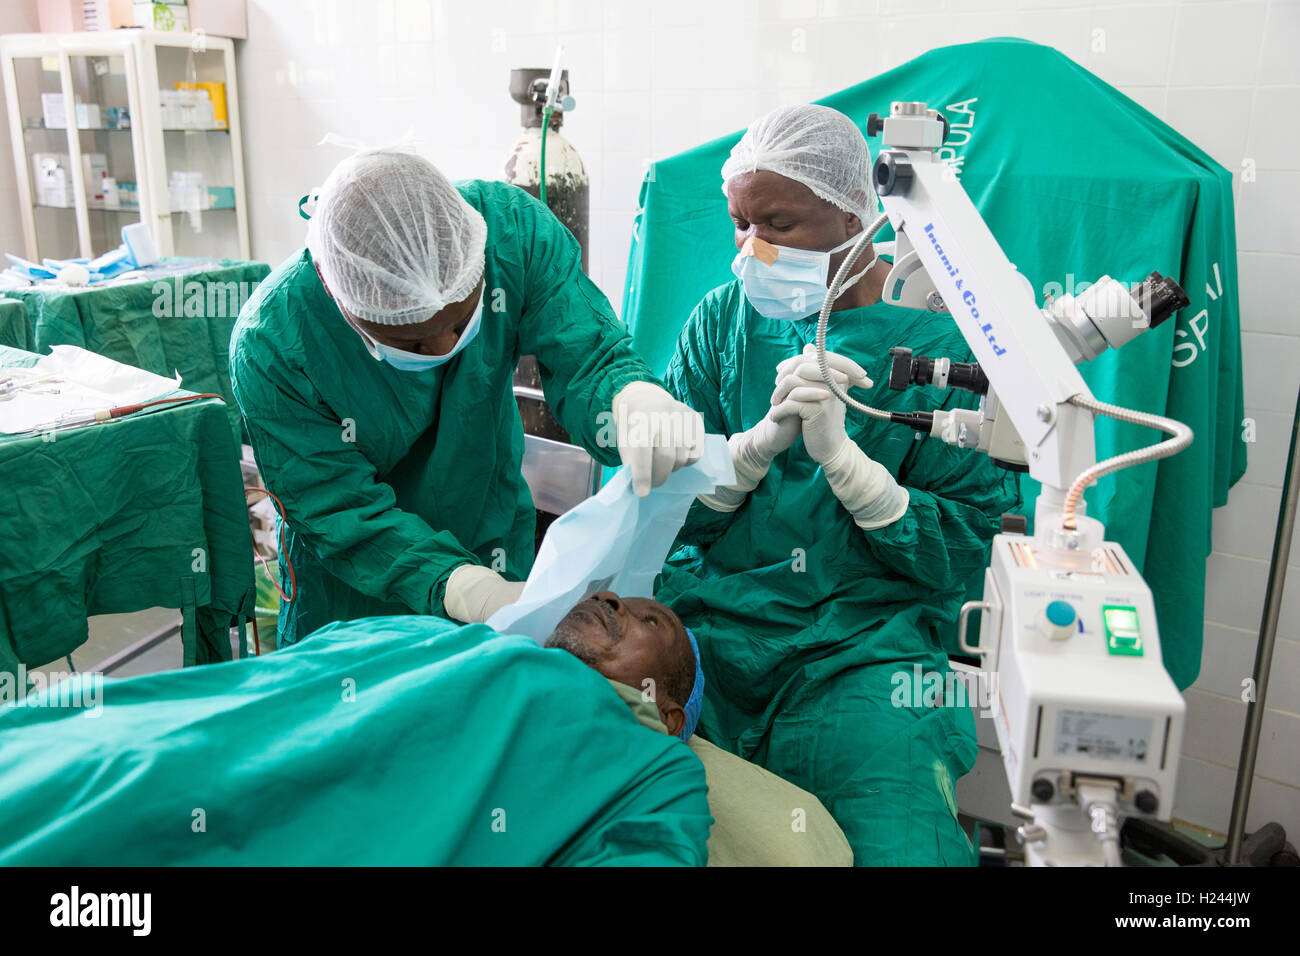 Ribaue Hospital, Ribaue,  Nampula Province, Mozambique, August 2015.  Ophthamologist Dr Anselmo Vilanculo and his team in the operating theatre perform eye surgery to remove cataracts from patients identified by outreach team screening.   Photo by Mike Goldwater Stock Photo